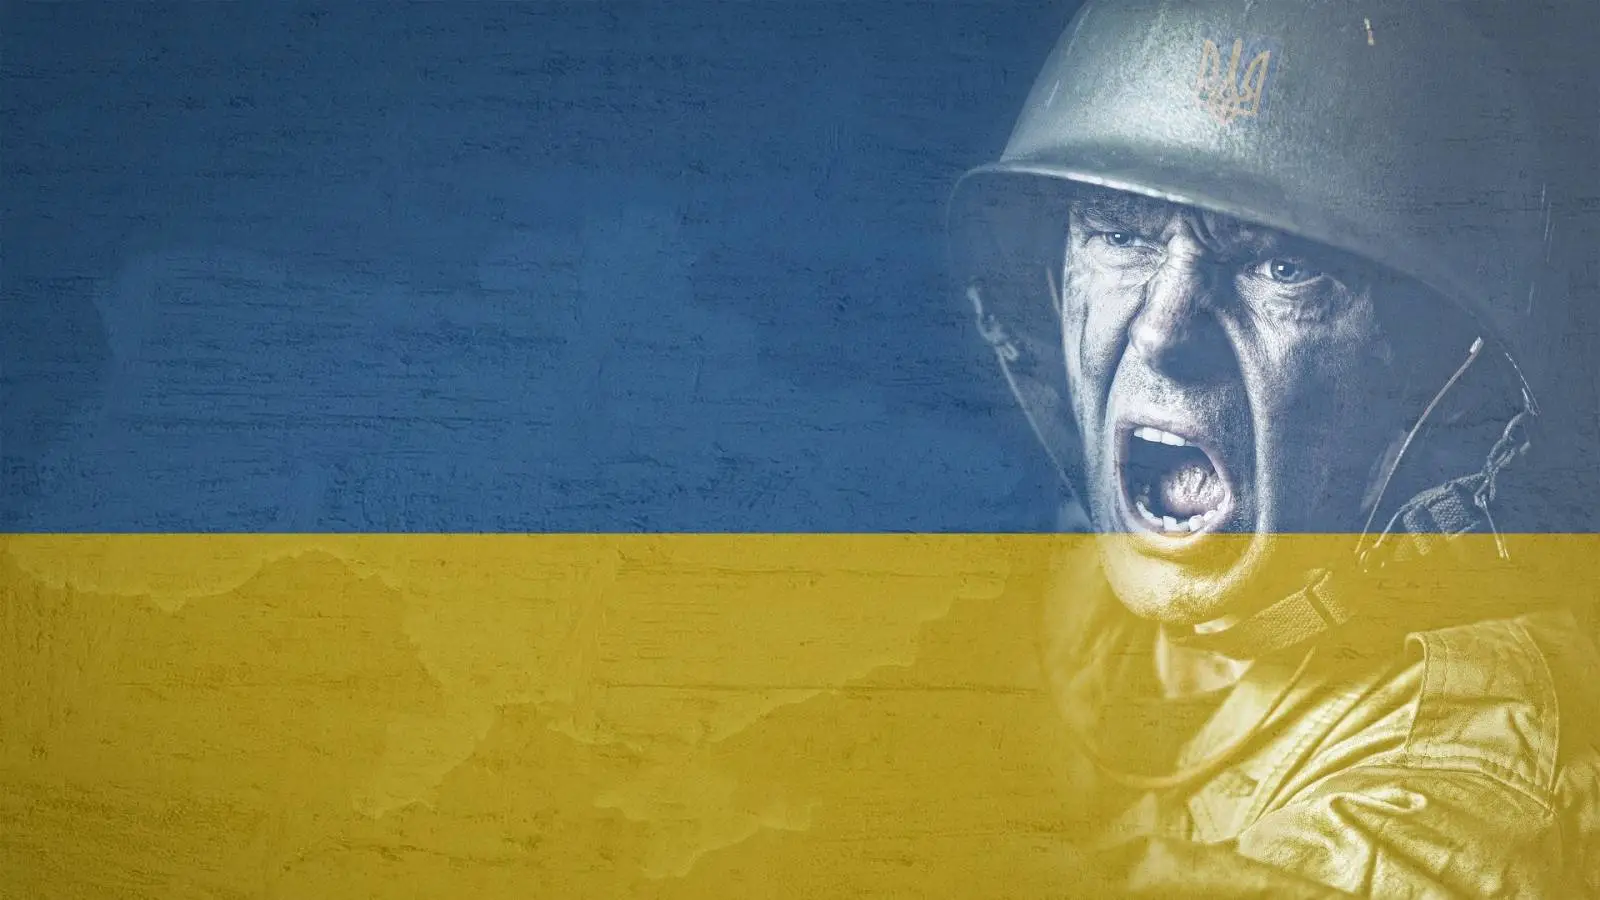 Ukraine will continue the counter-offensives in Luhansk and Donetsk despite the possible annexation to Russia